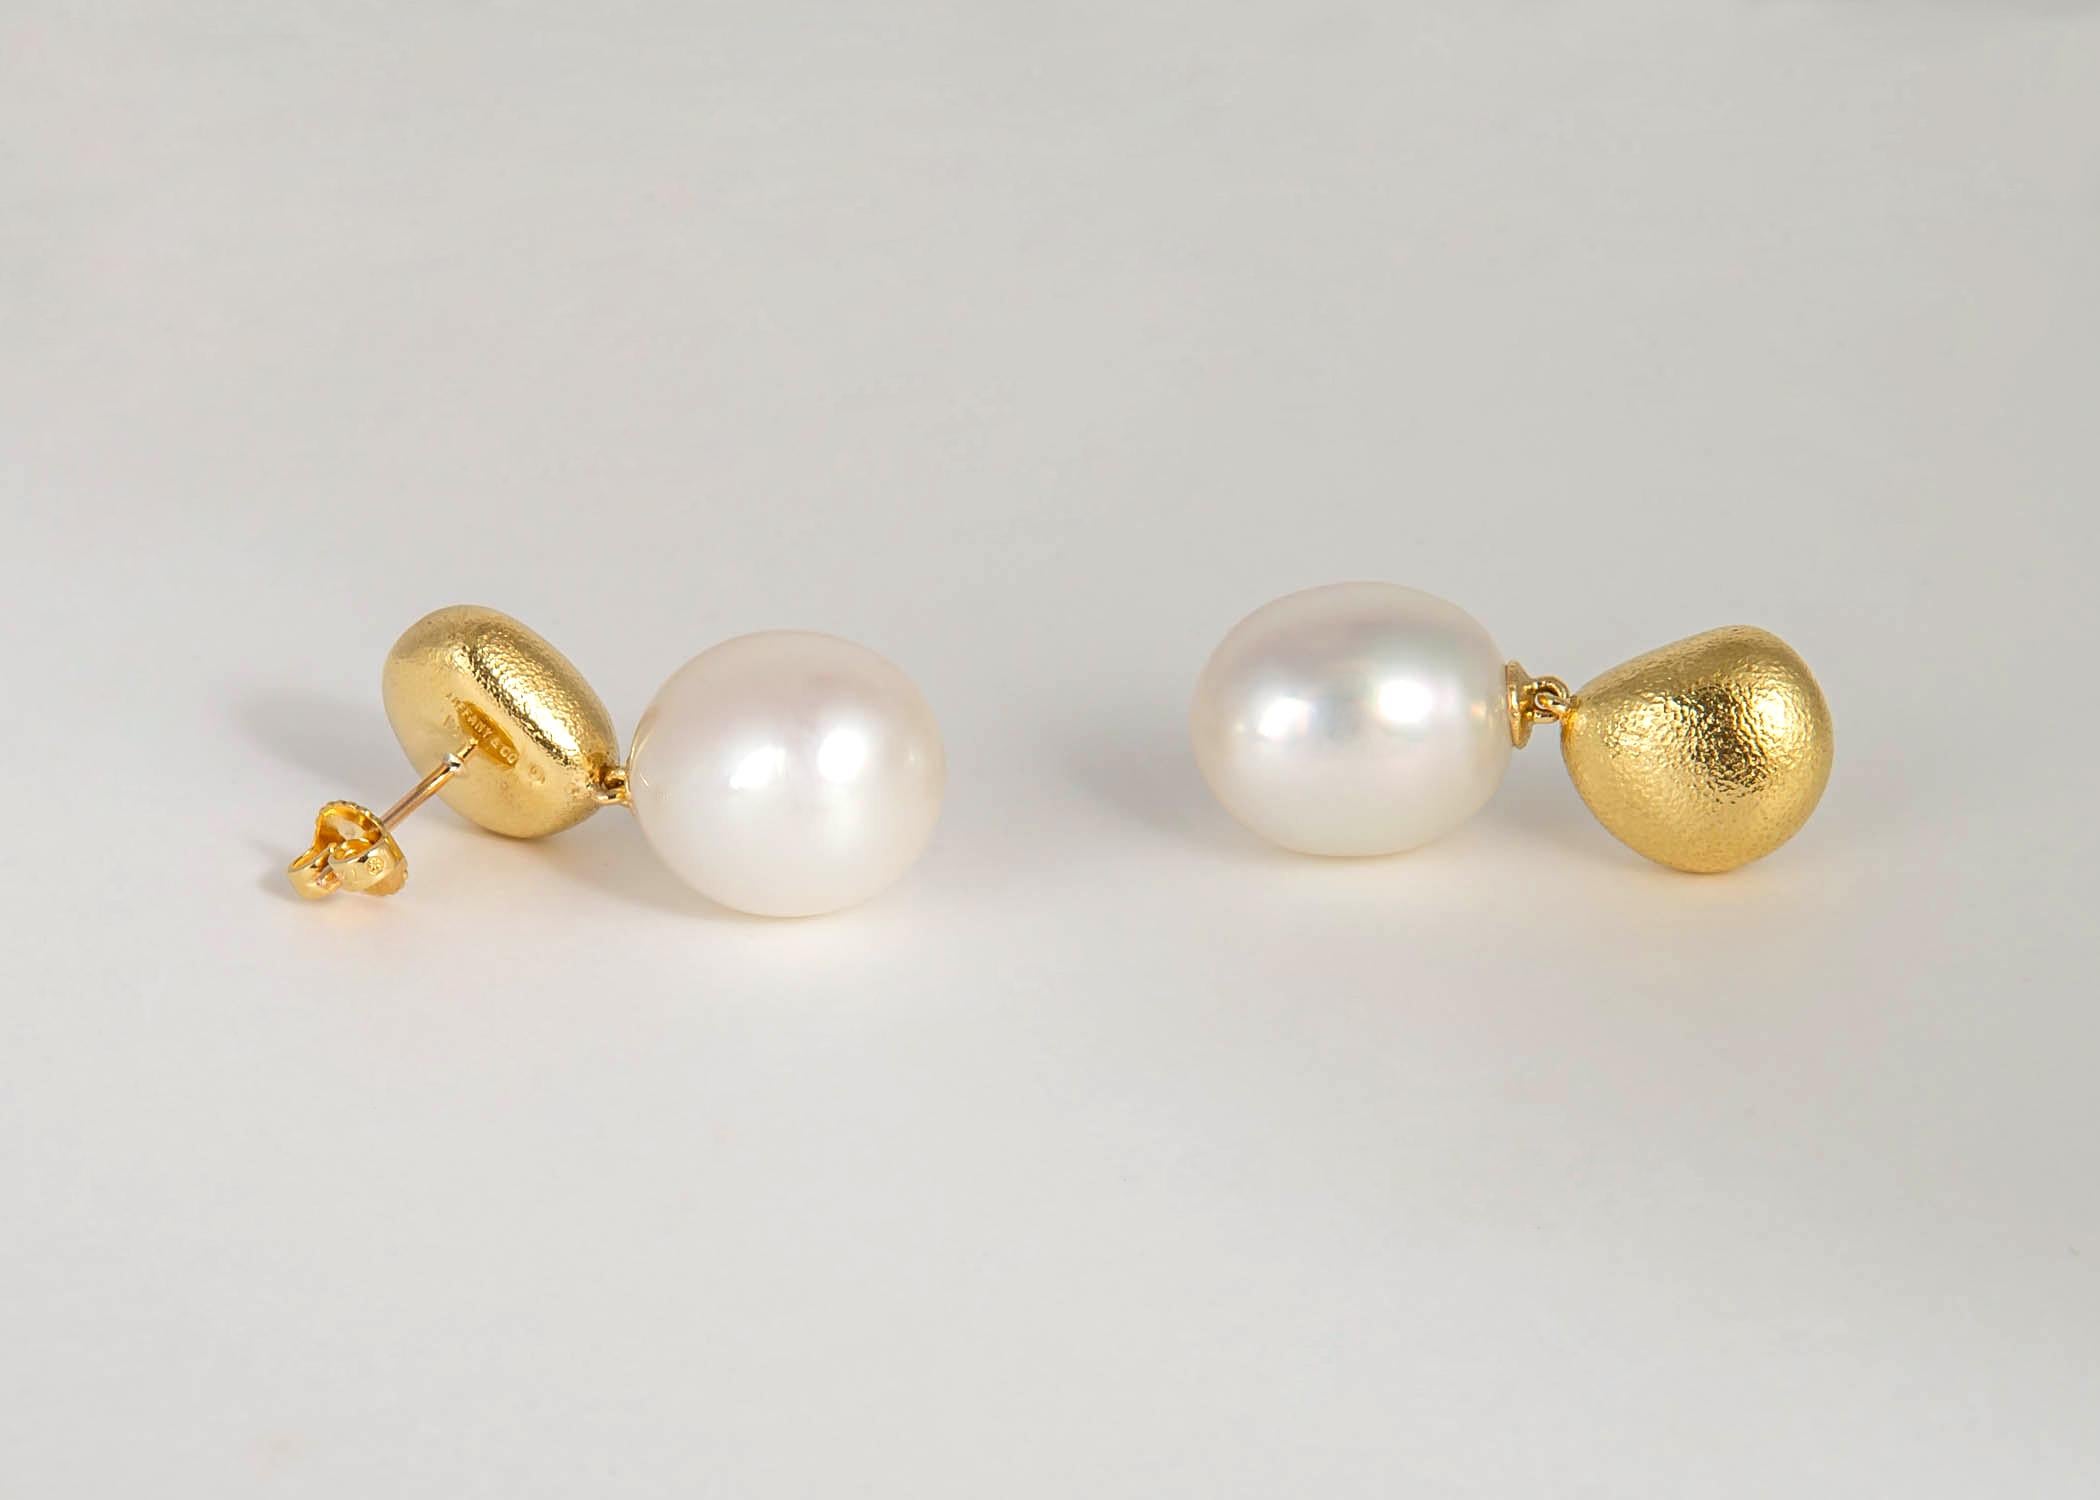 A easy to wear contemporary take on a classic drop pearl earring. Tiffany combines textured gold and South Sea pearls to create this chic stylish design 1 1/8 inches in length. Pearls 14.8 x 13.2 mm